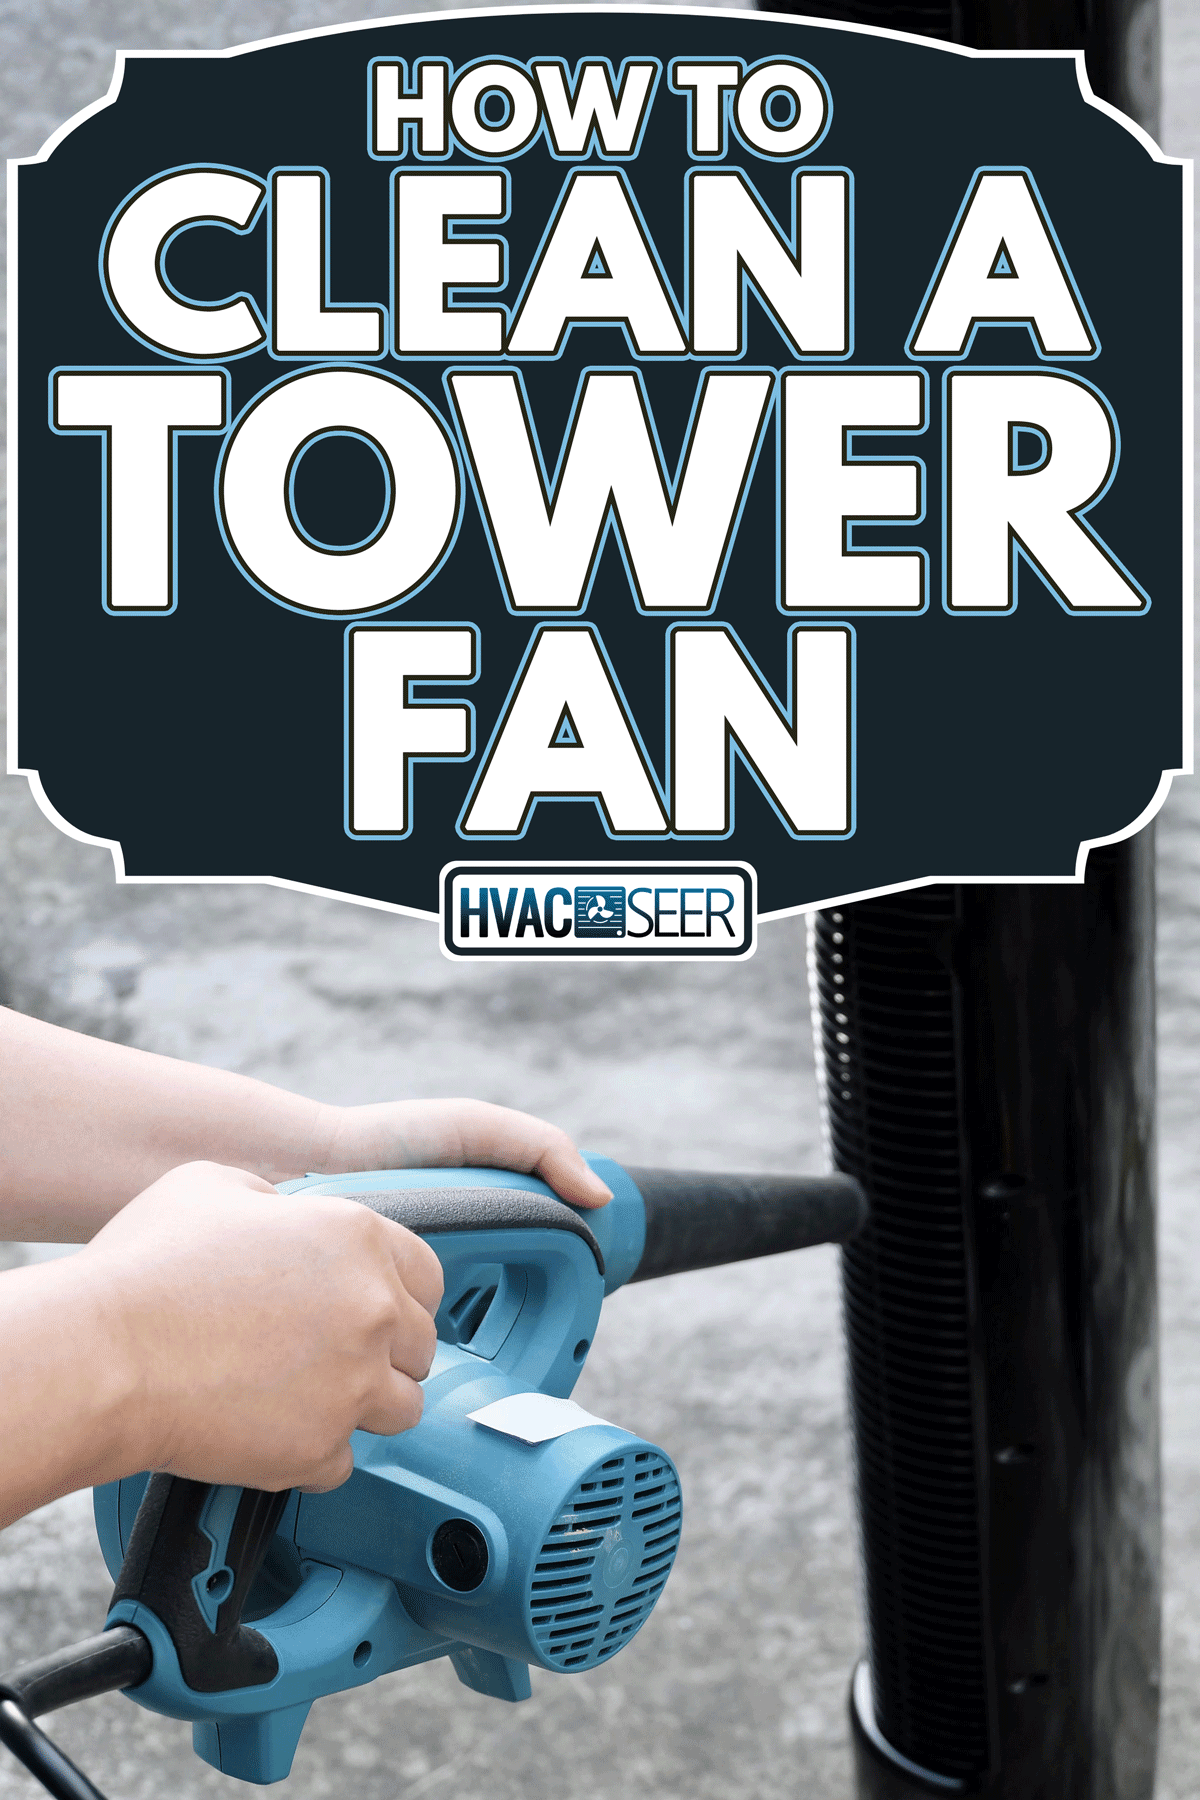 Person use blower cleaning a tower fan, How To Clean A Tower Fan